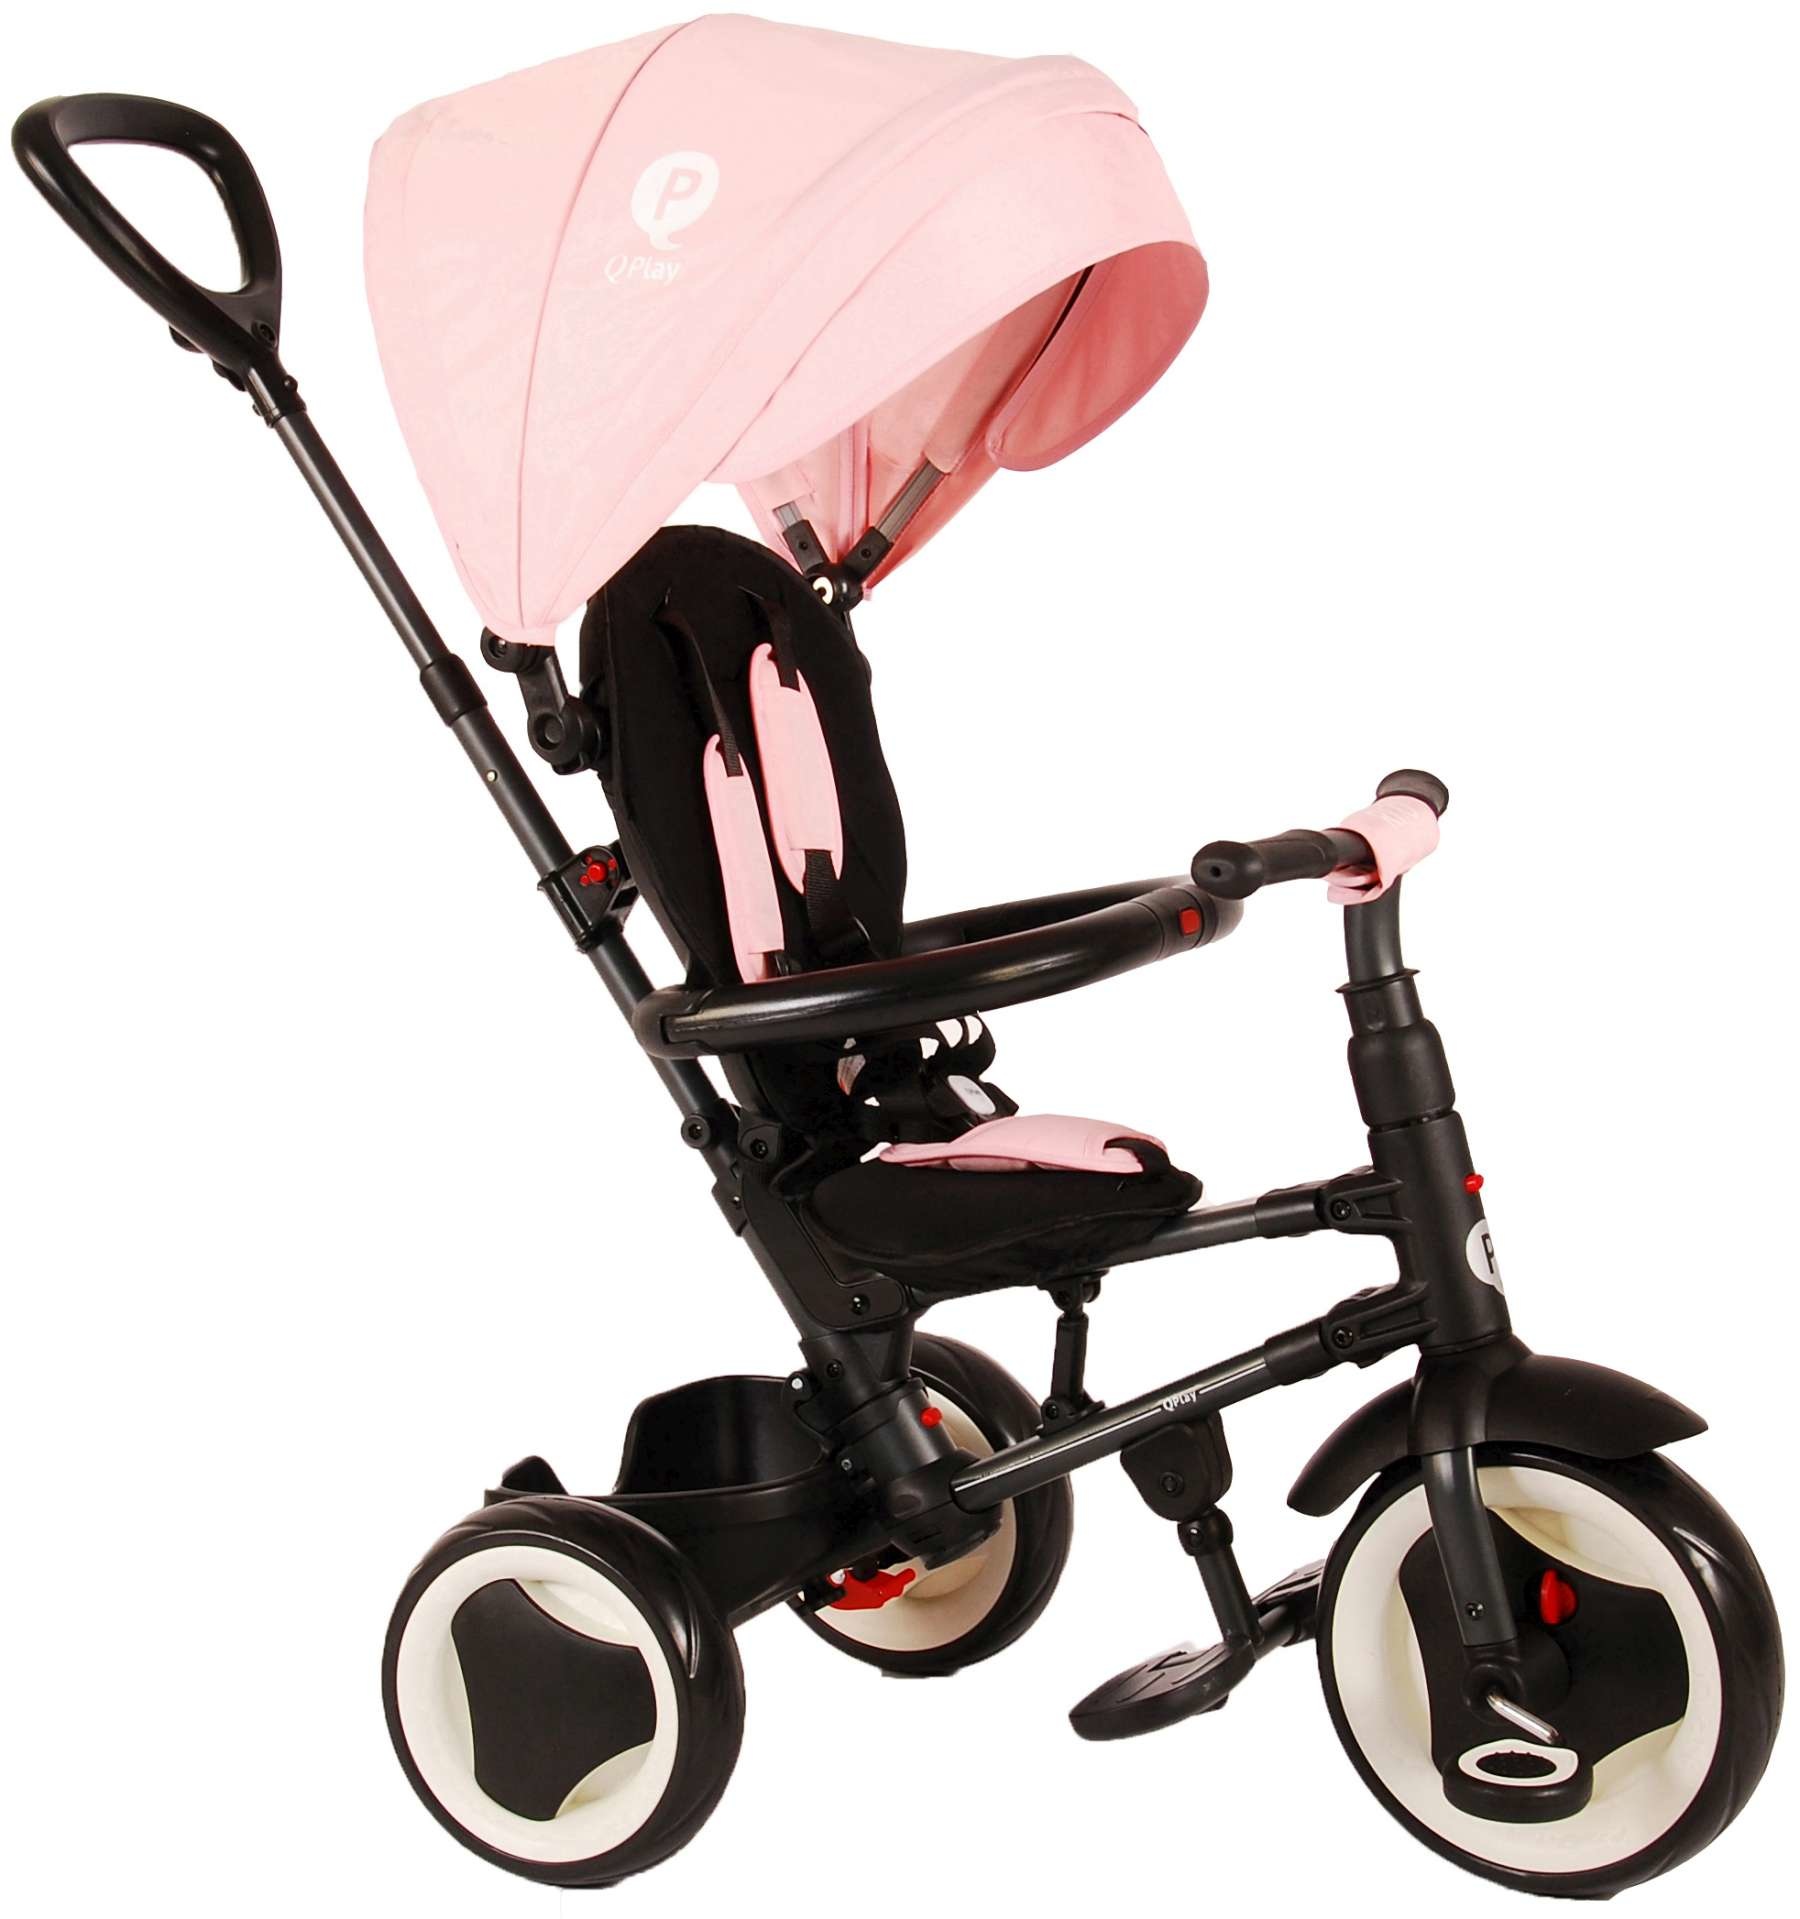 Q-PLAY Q-PLAY RITO DRIEWIELER 3 IN 1 DELUXE, ROZE